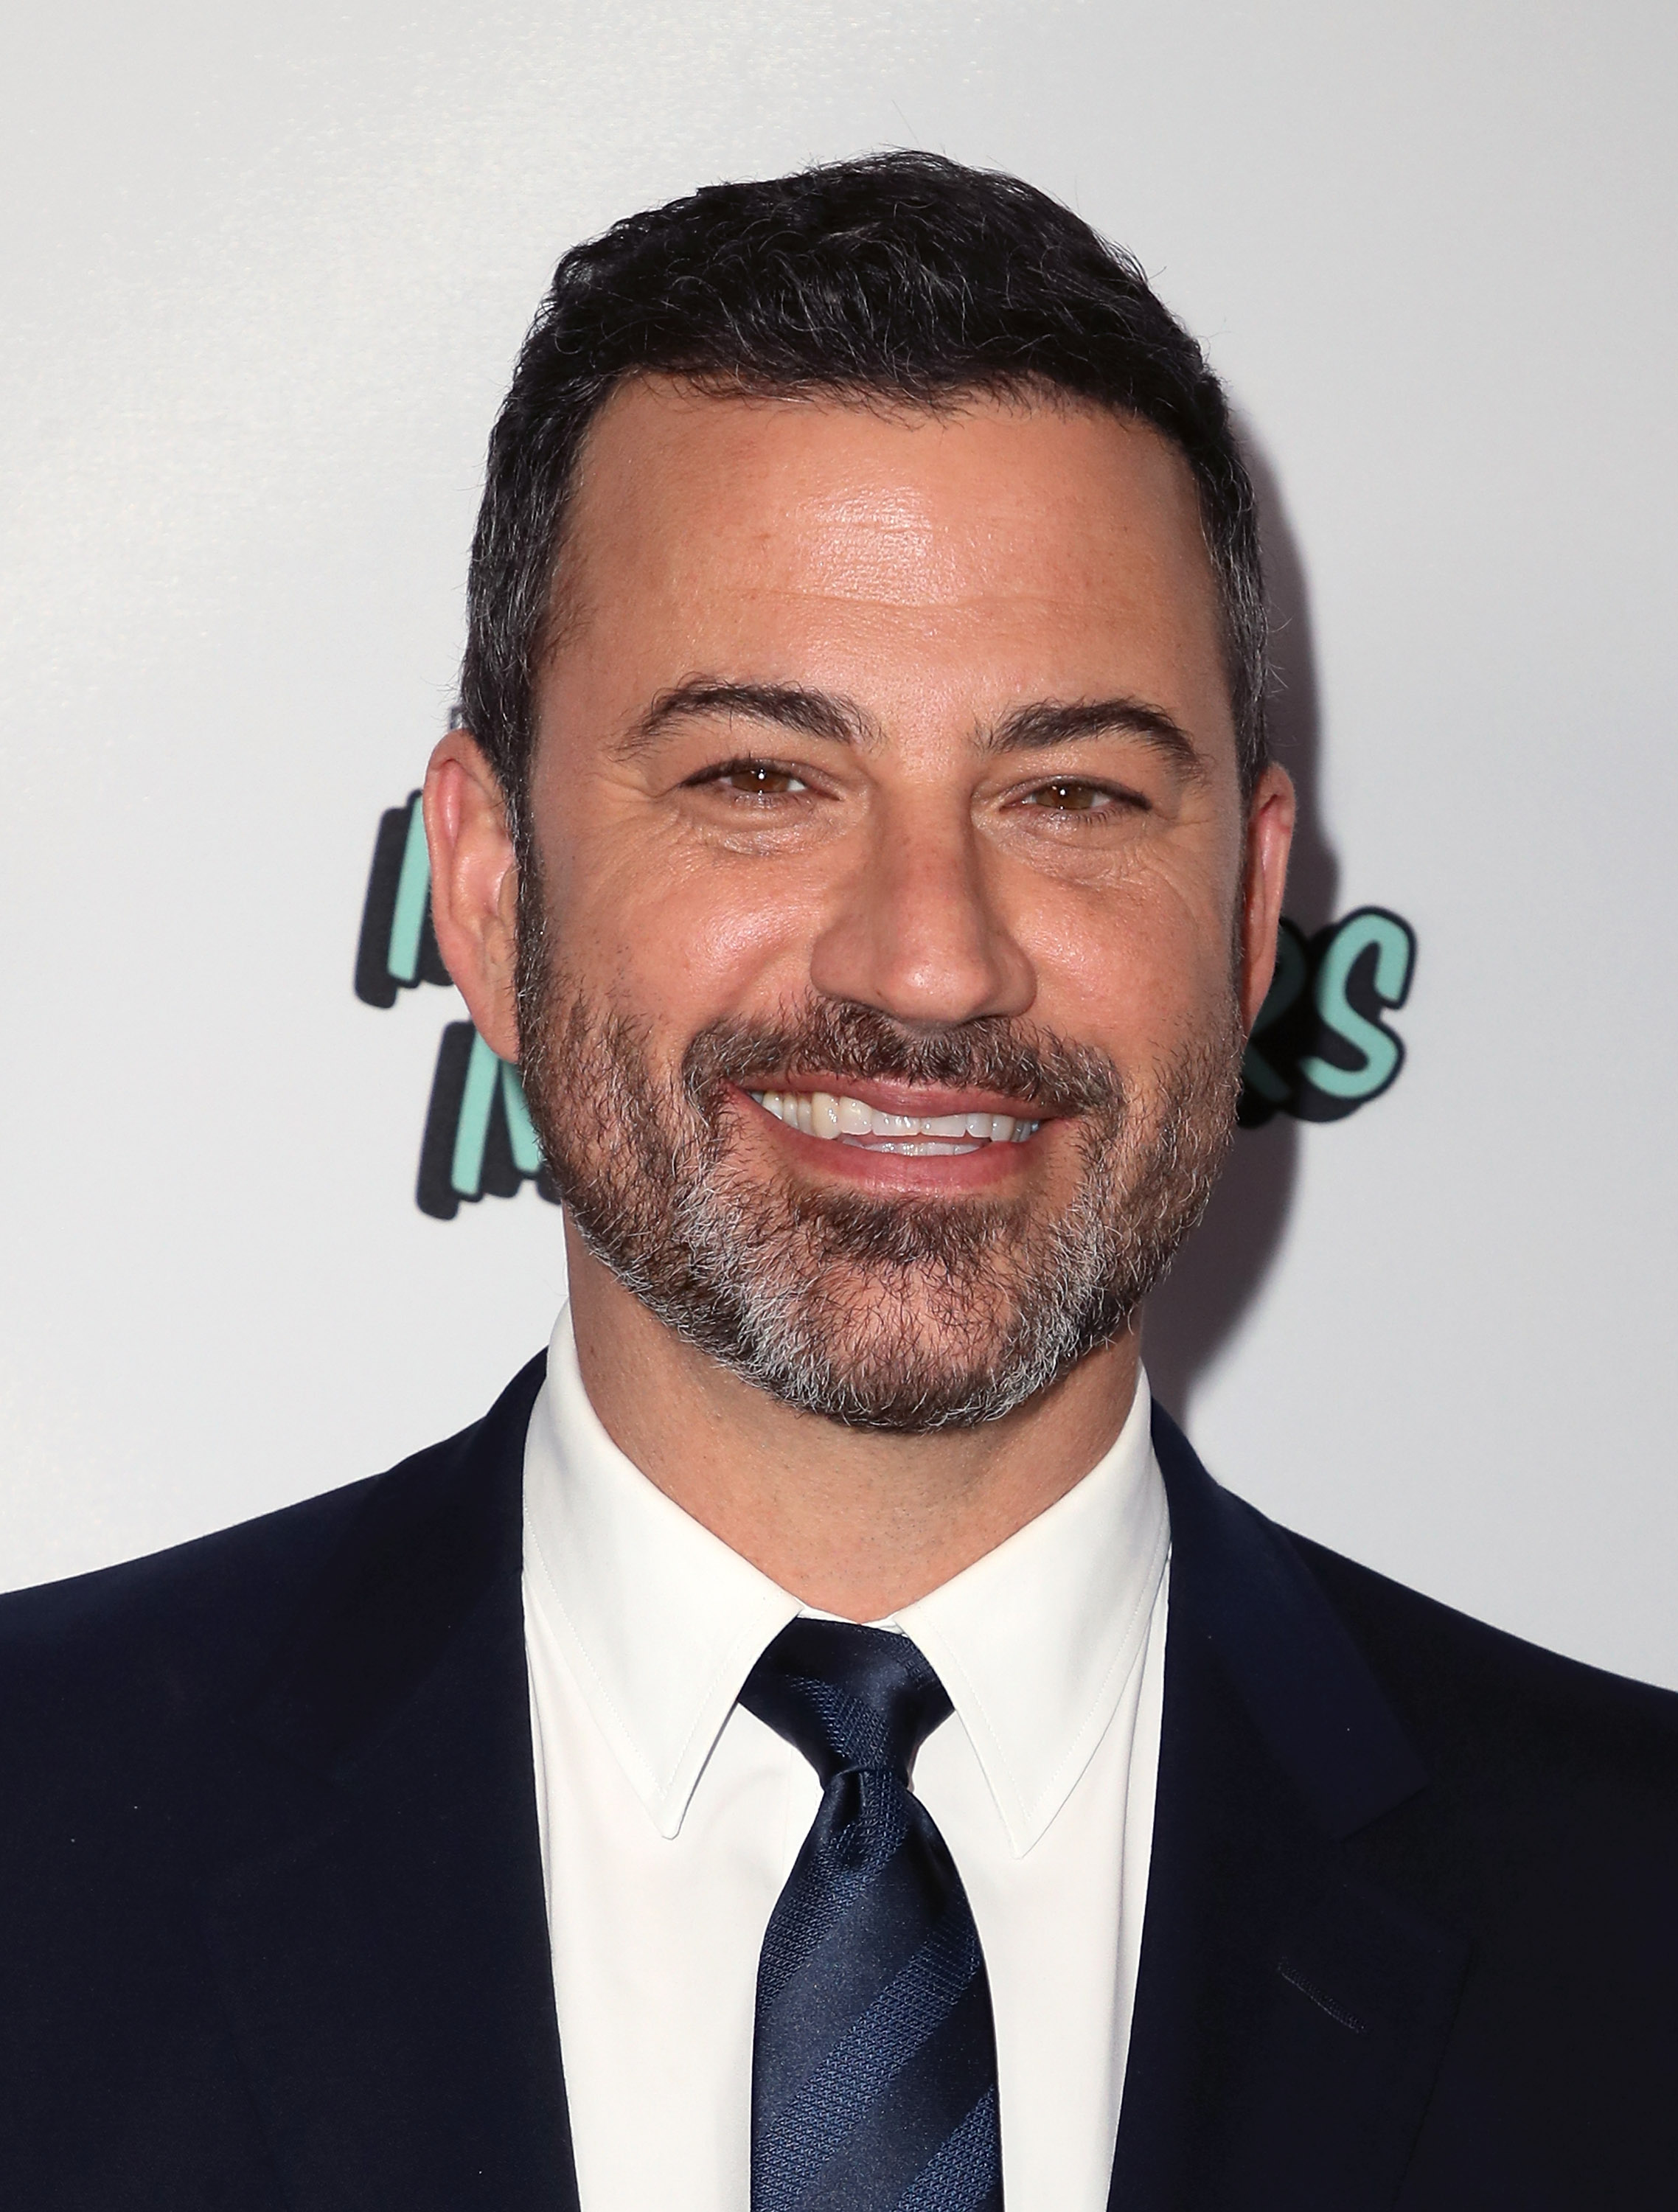 Jimmy Kimmel at the premiere of truTV's "Bobcat Goldthwait's Misfits & Monsters" at the Hollywood Roosevelt Hotel on July 11, 2018, in California. | Source: Getty Images